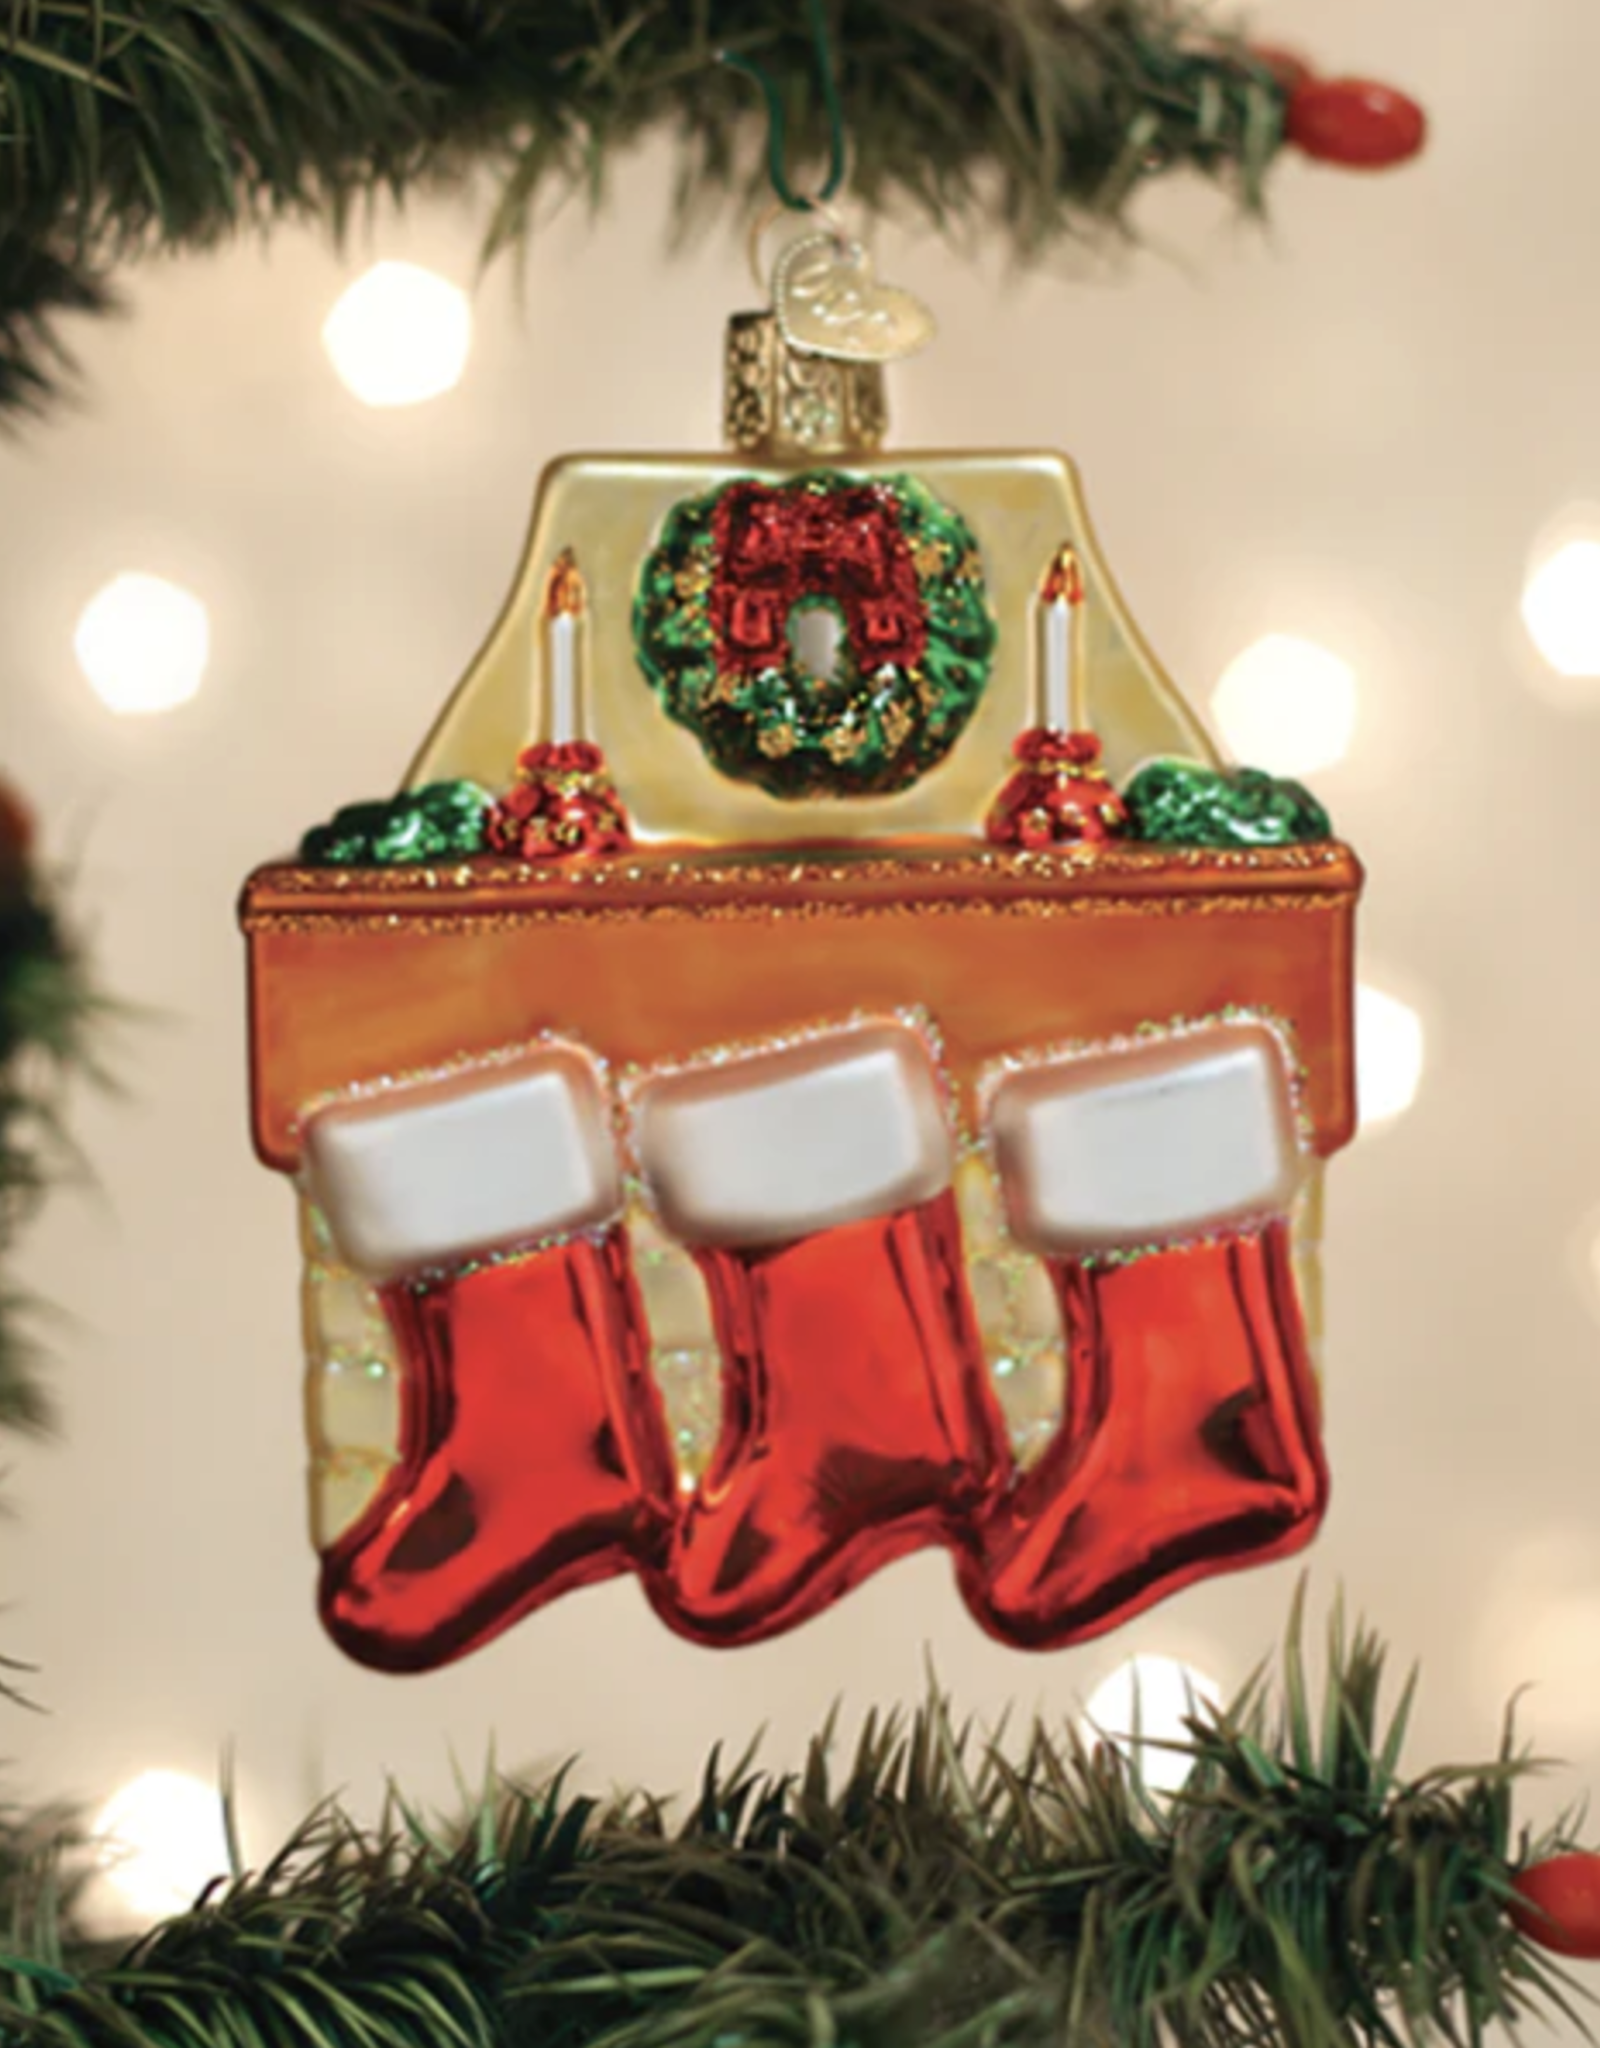 Family of 3 Stockings Ornament